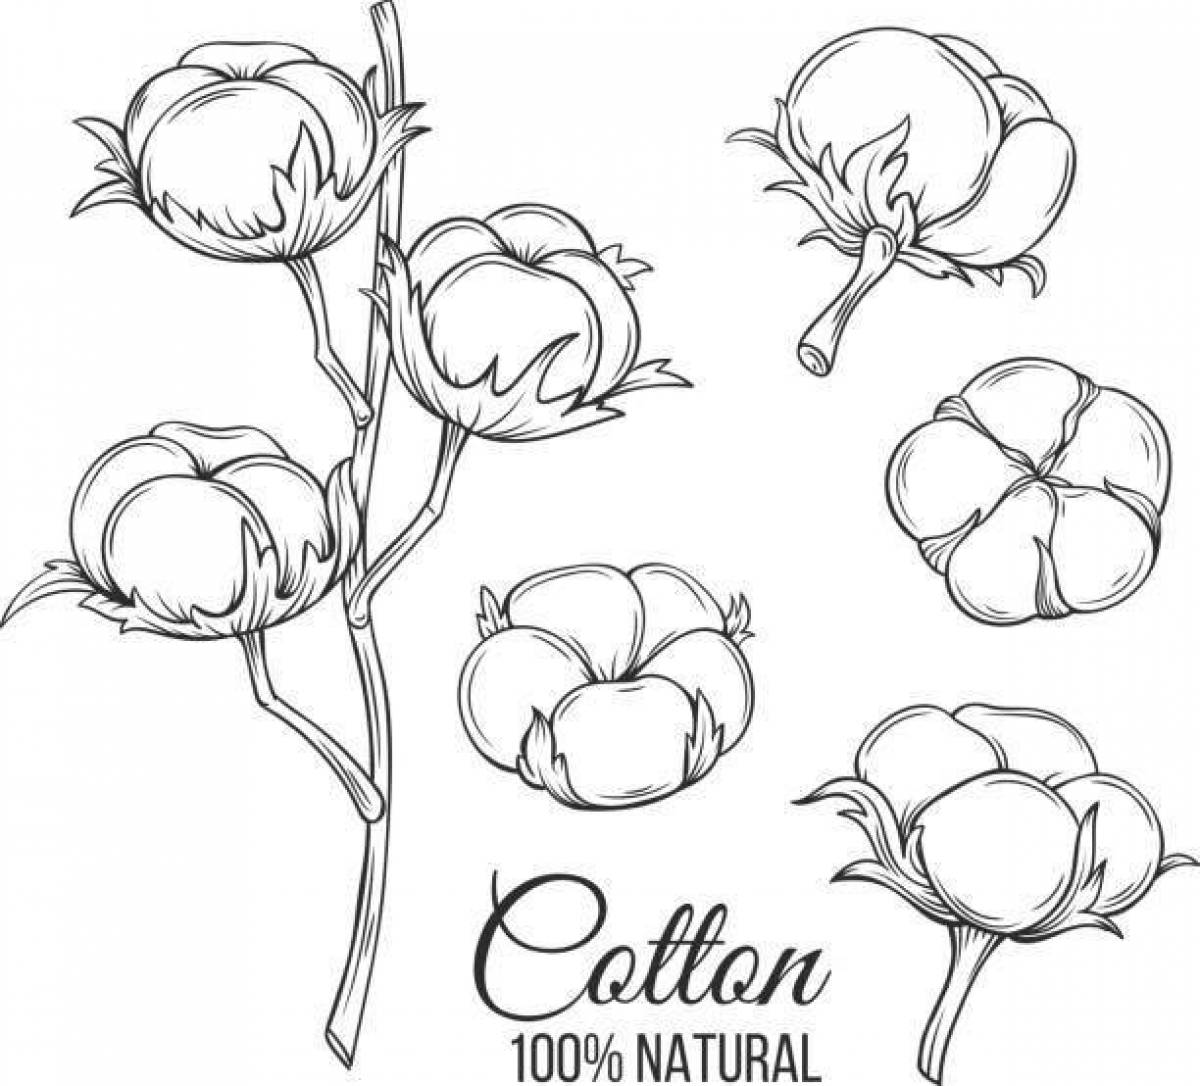 Great cotton coloring book